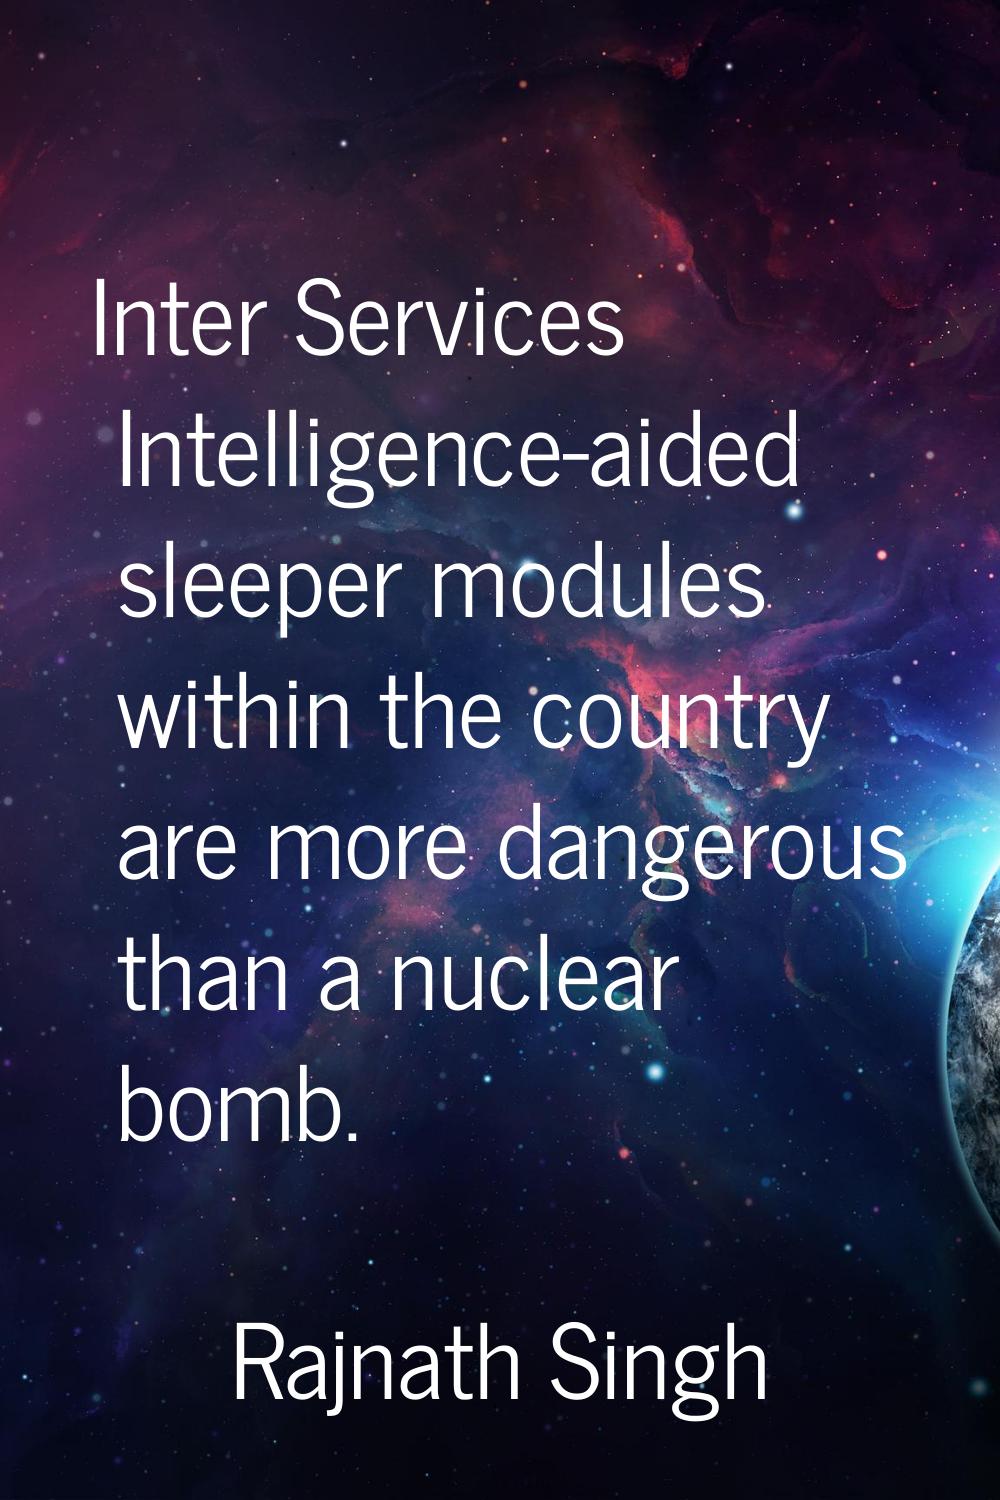 Inter Services Intelligence-aided sleeper modules within the country are more dangerous than a nucl